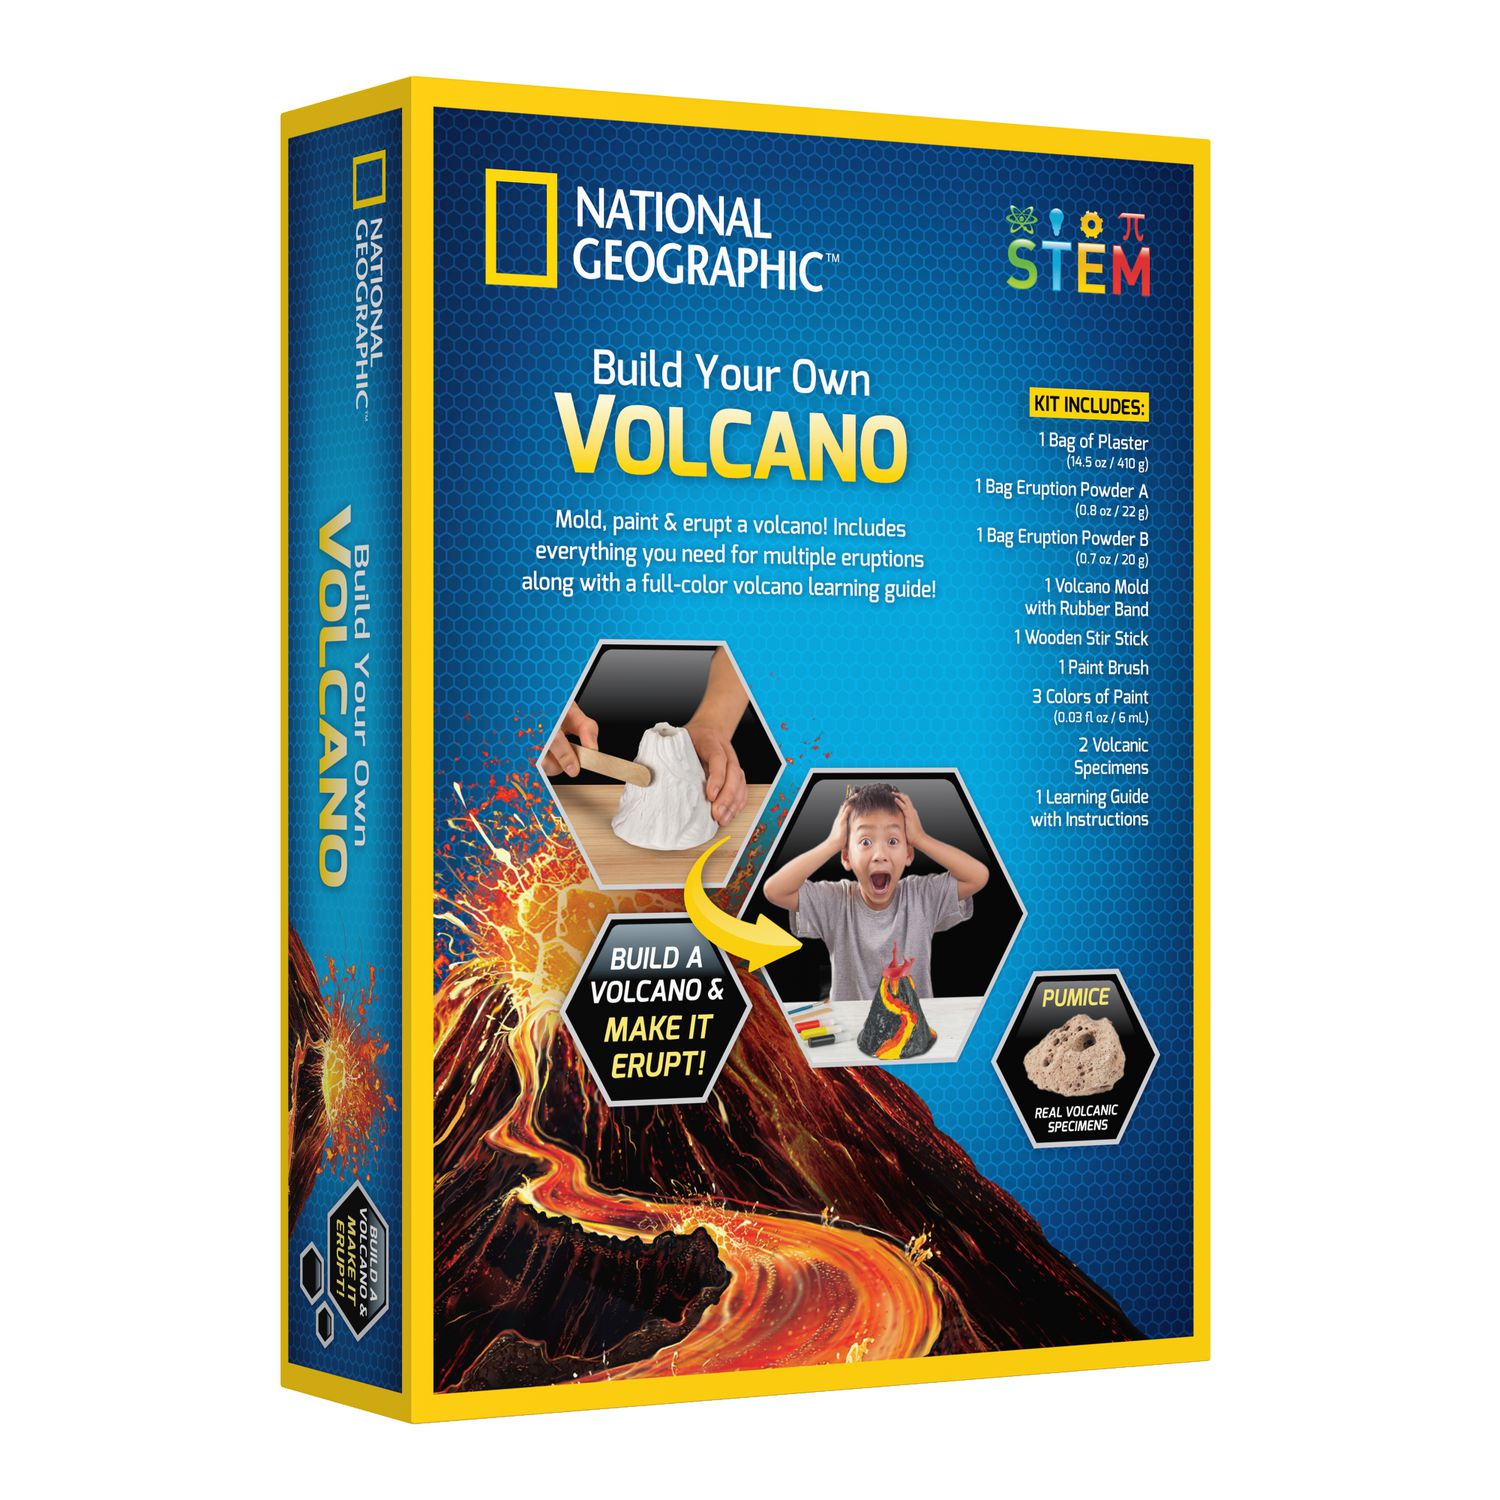 Build　Erupting　up,　Your　National　Volcano　Ages　Volcano　Kit　for　Series,　Geographic　STEM　and　Own　An　Kids,　Build